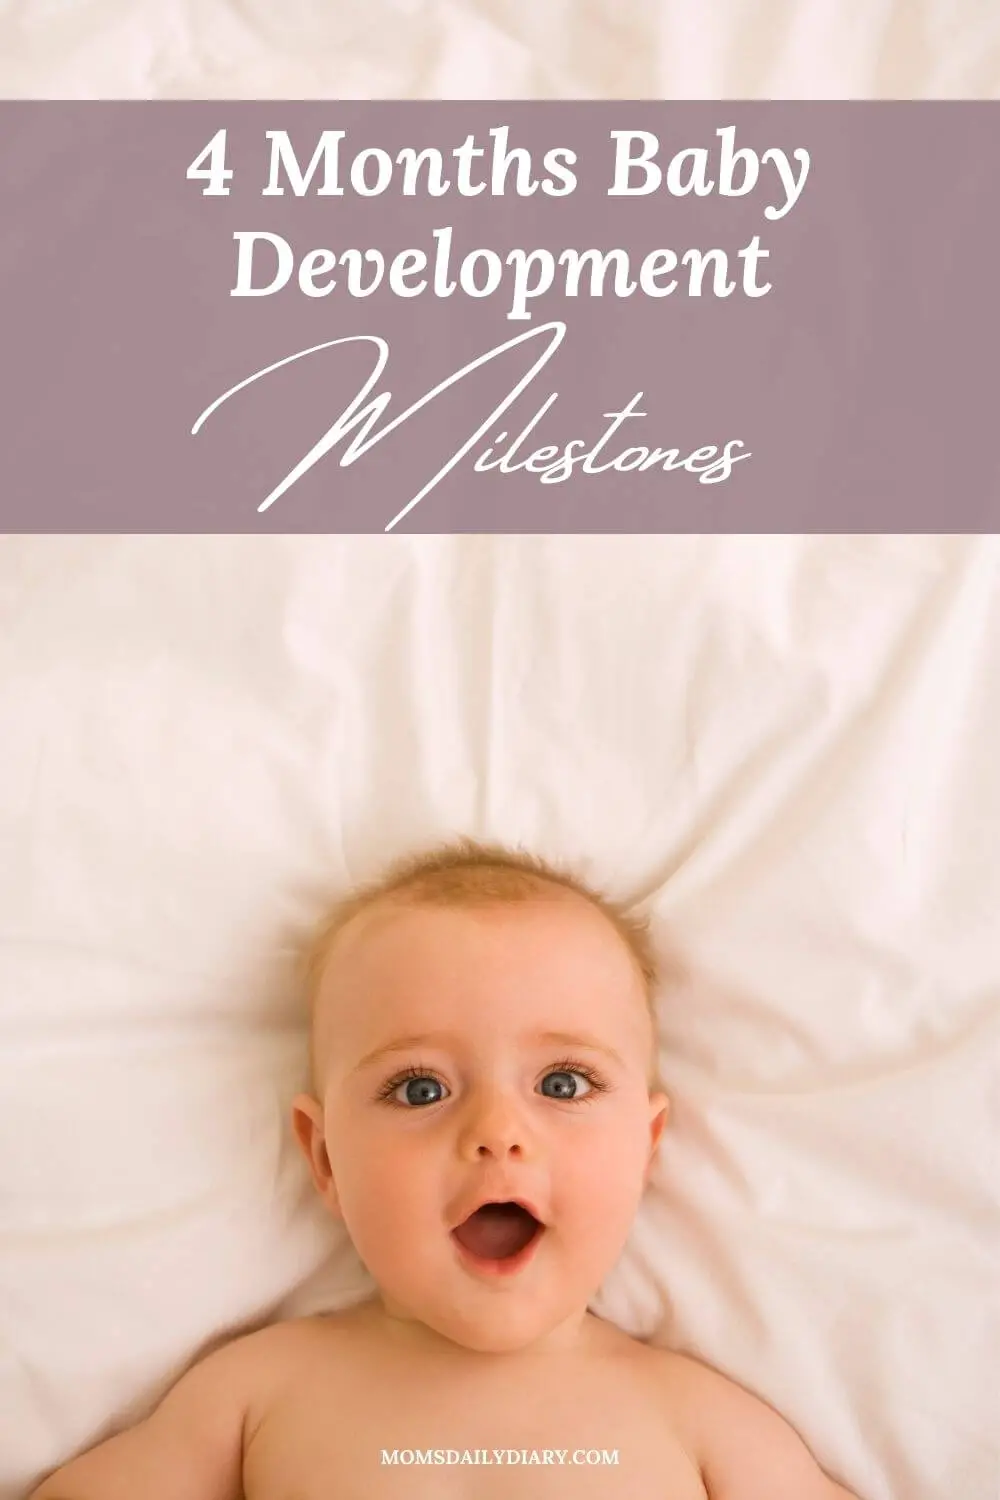 Have you noticed all the new skills your baby has? Here are the milestones associated with the 4 months baby development.